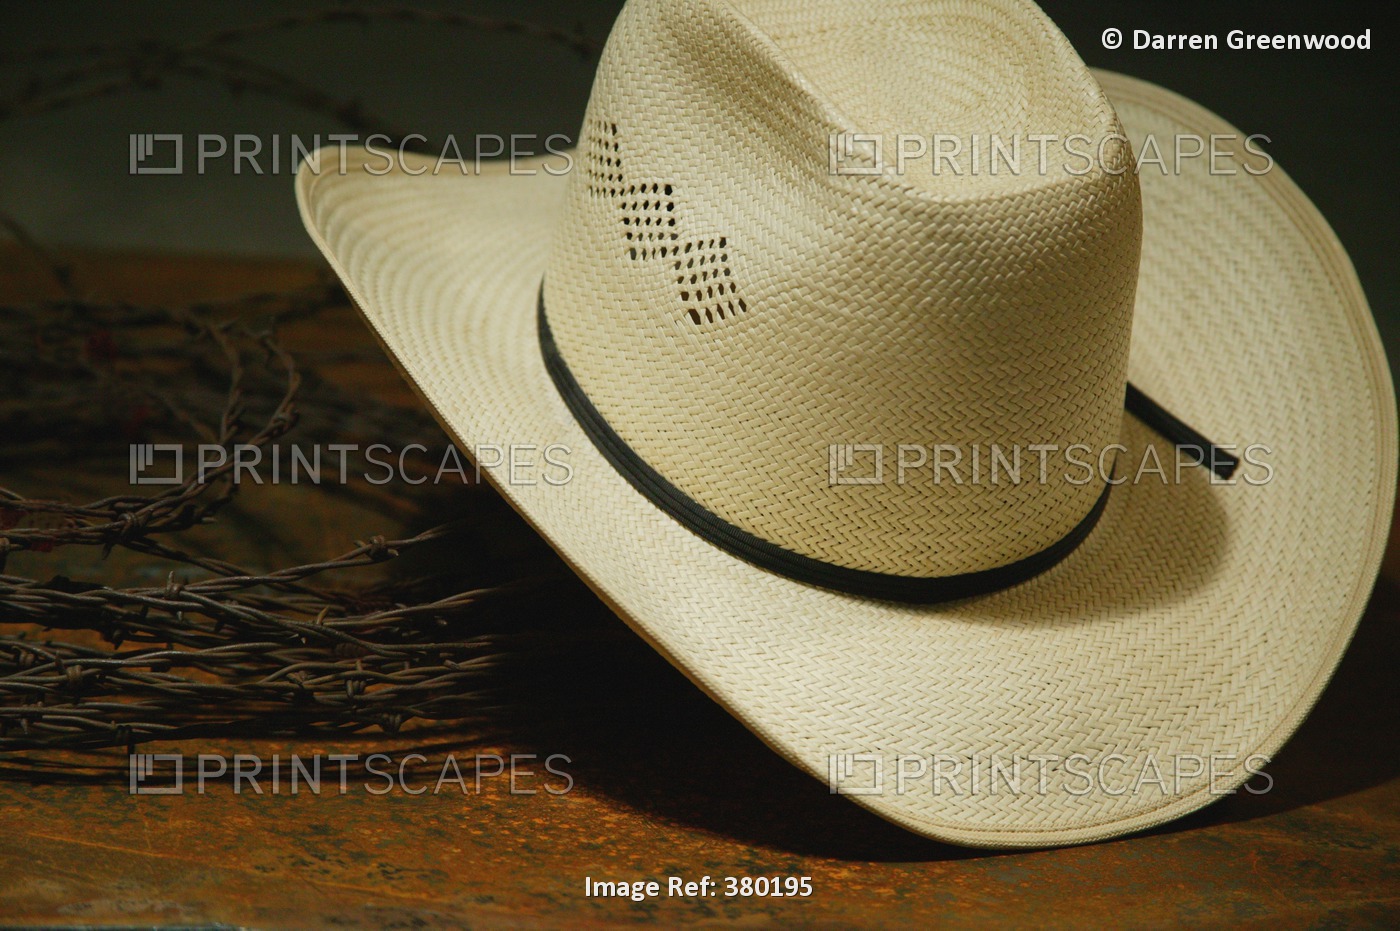 Cowboy Hat And Barbed Wire Still Life